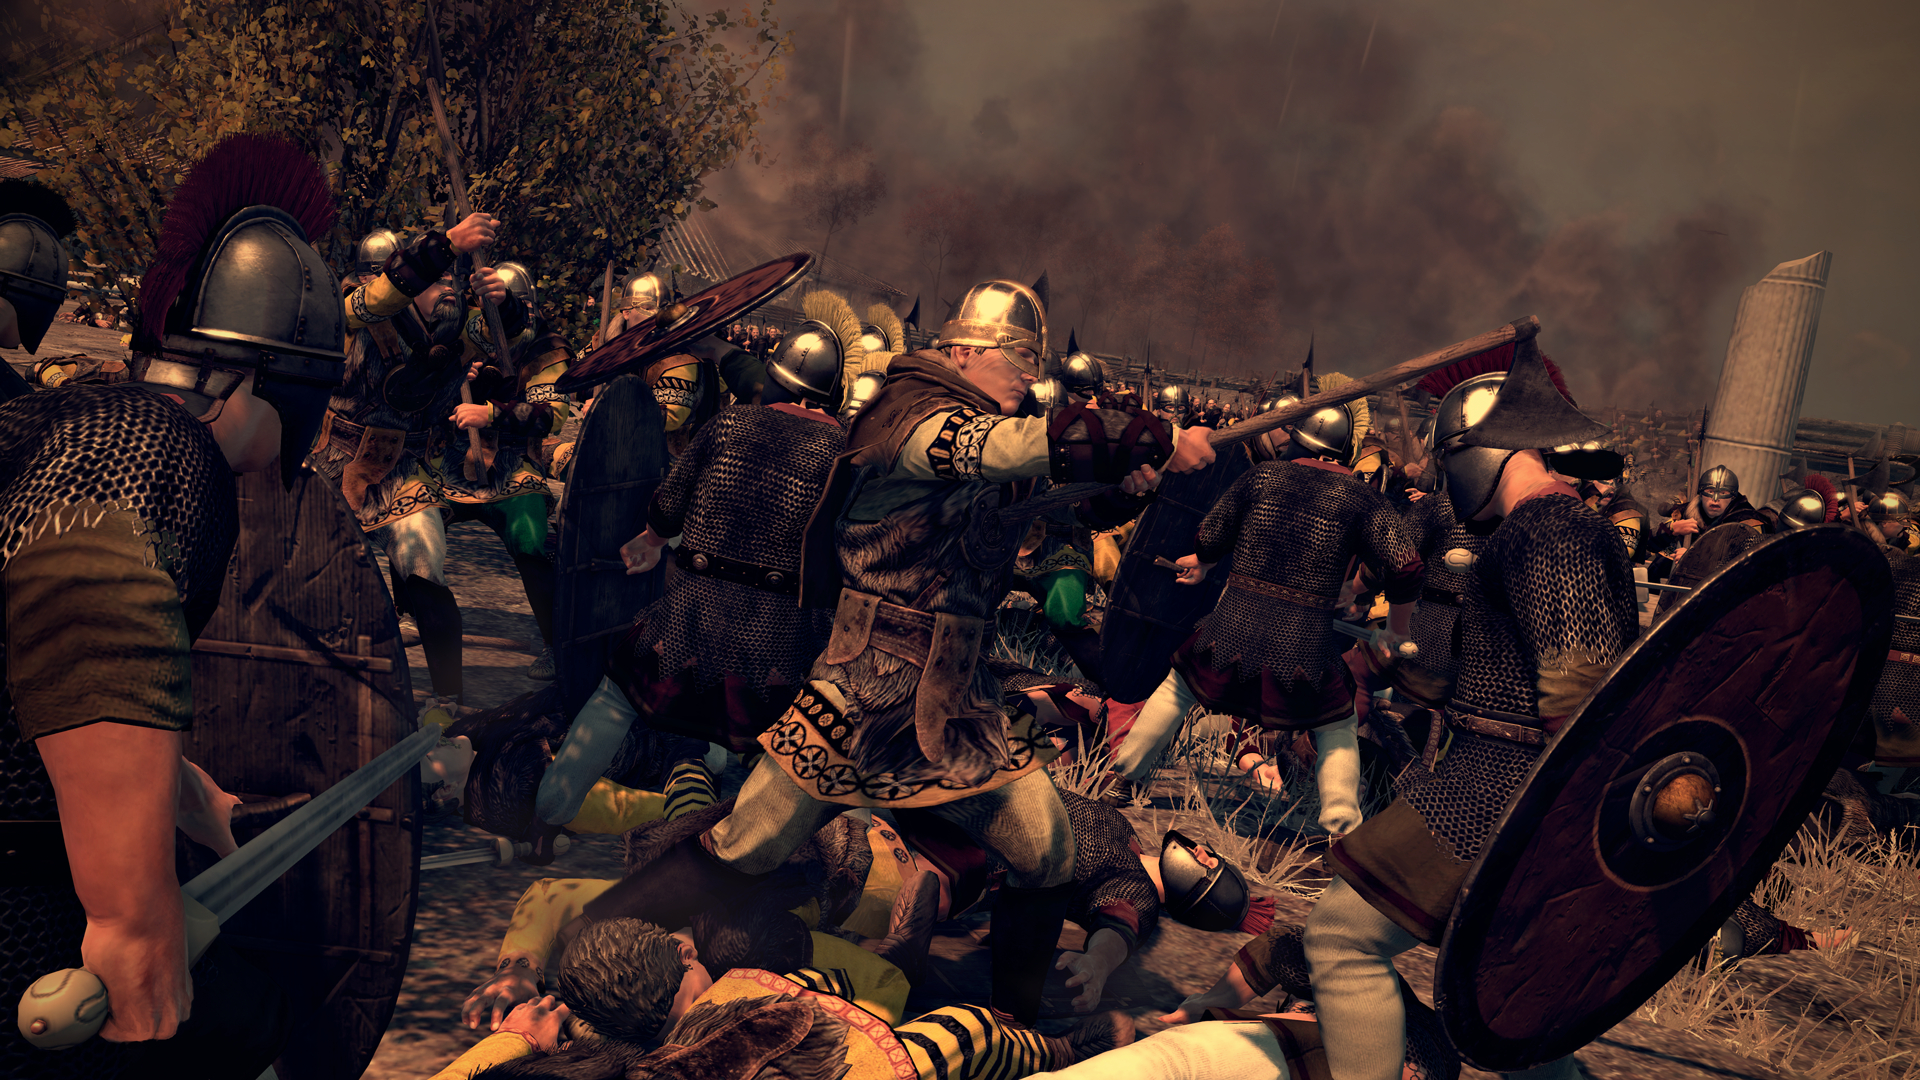 1920x1080 10+ Total War: Attila HD Wallpapers and Backgrounds